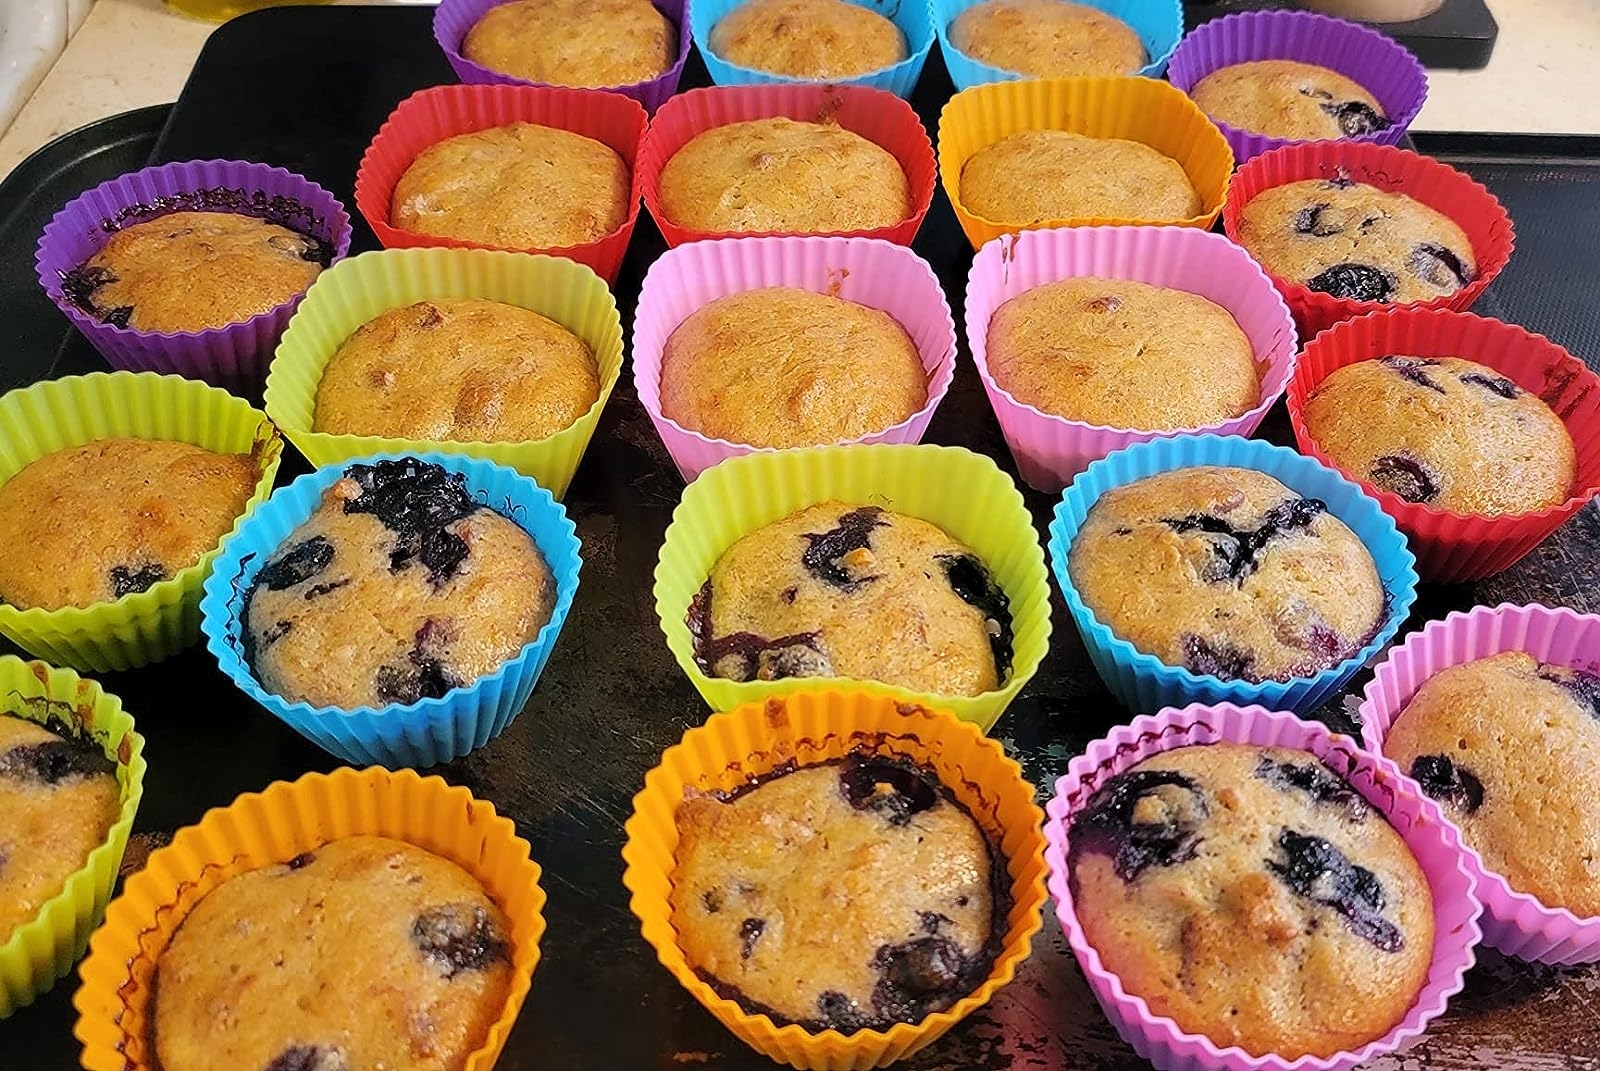 Reviewer image of different kinds of muffins baked in the silicone liners